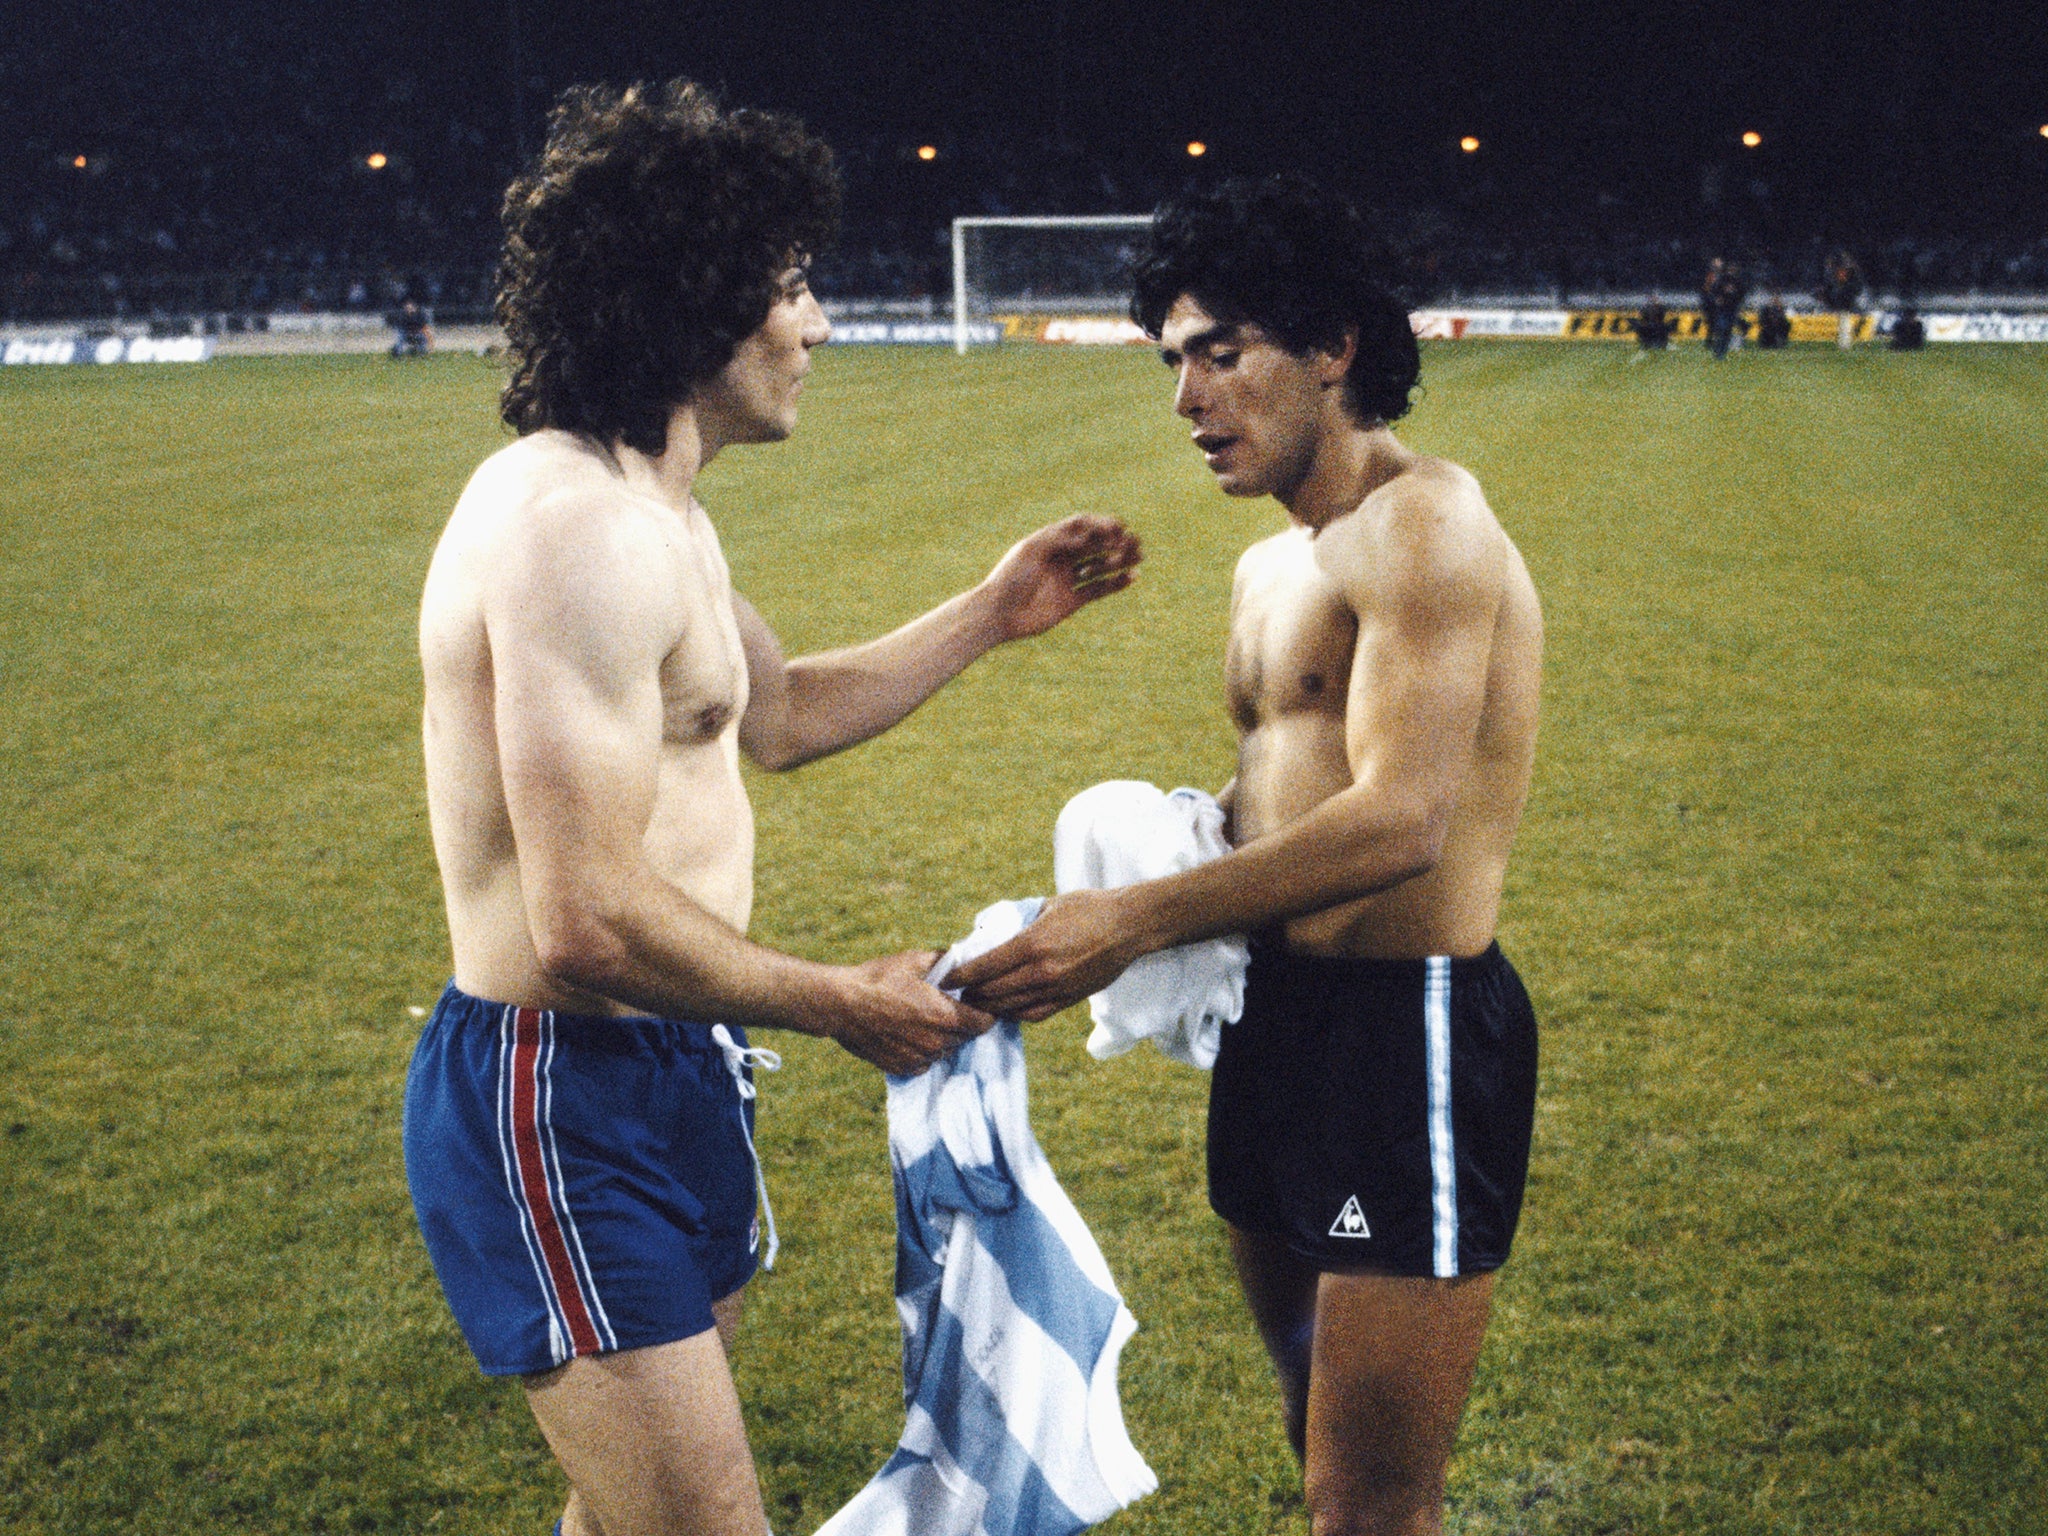 England captain Kevin Keegan exchanges shirts with a teenage Diego Maradona after a friendly match at Wembley Stadium between England and Argentina on 13 May 1980